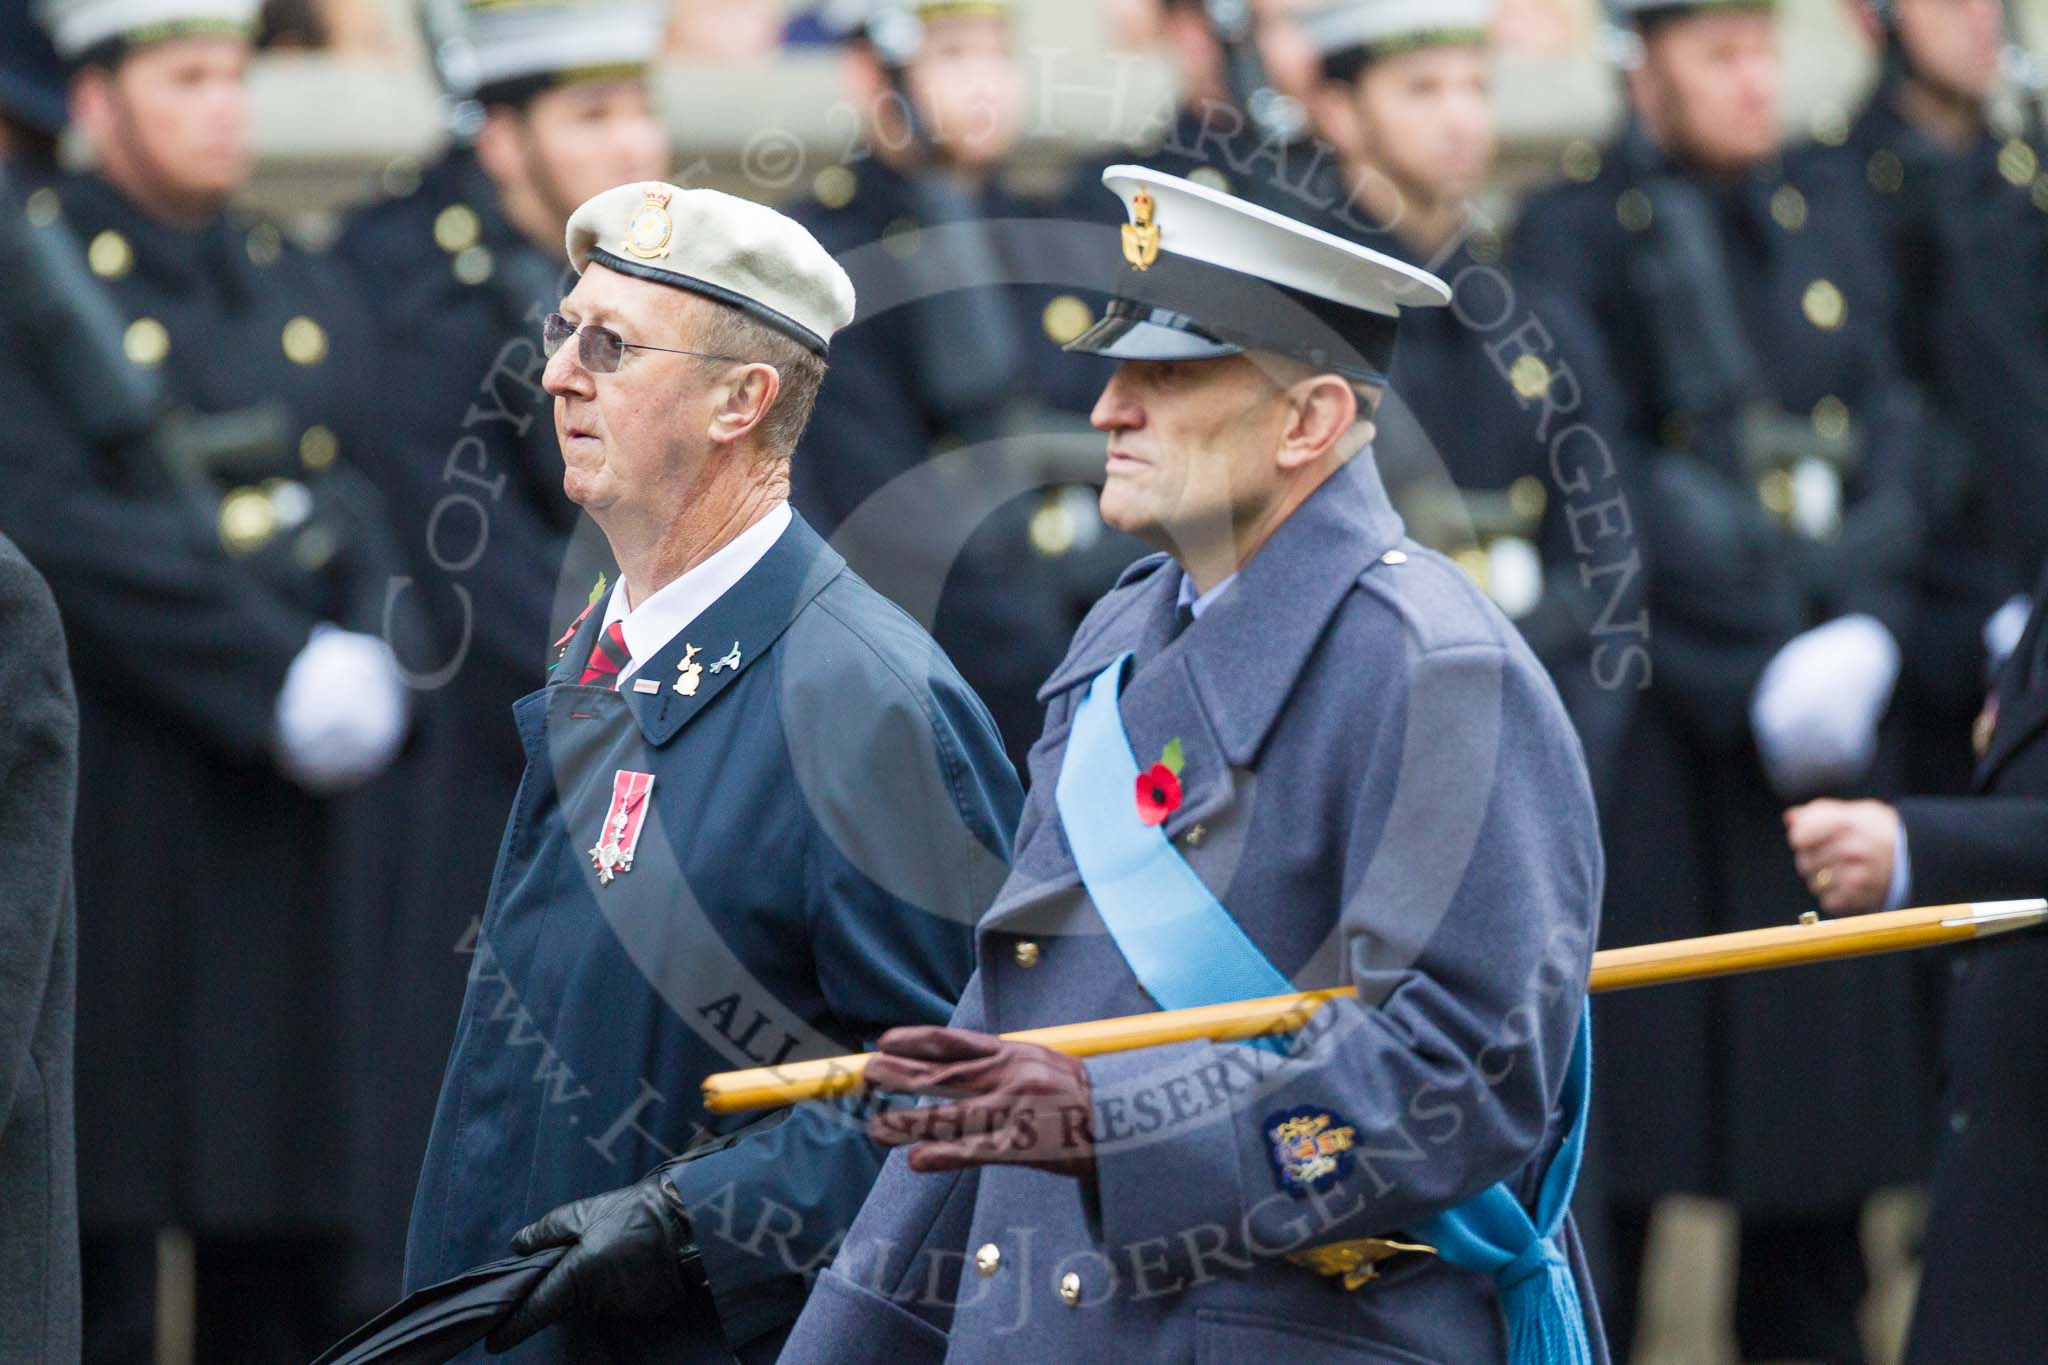 Remembrance Sunday at the Cenotaph 2015: Group C24, Royal Air Force Police Association.
Cenotaph, Whitehall, London SW1,
London,
Greater London,
United Kingdom,
on 08 November 2015 at 11:50, image #569